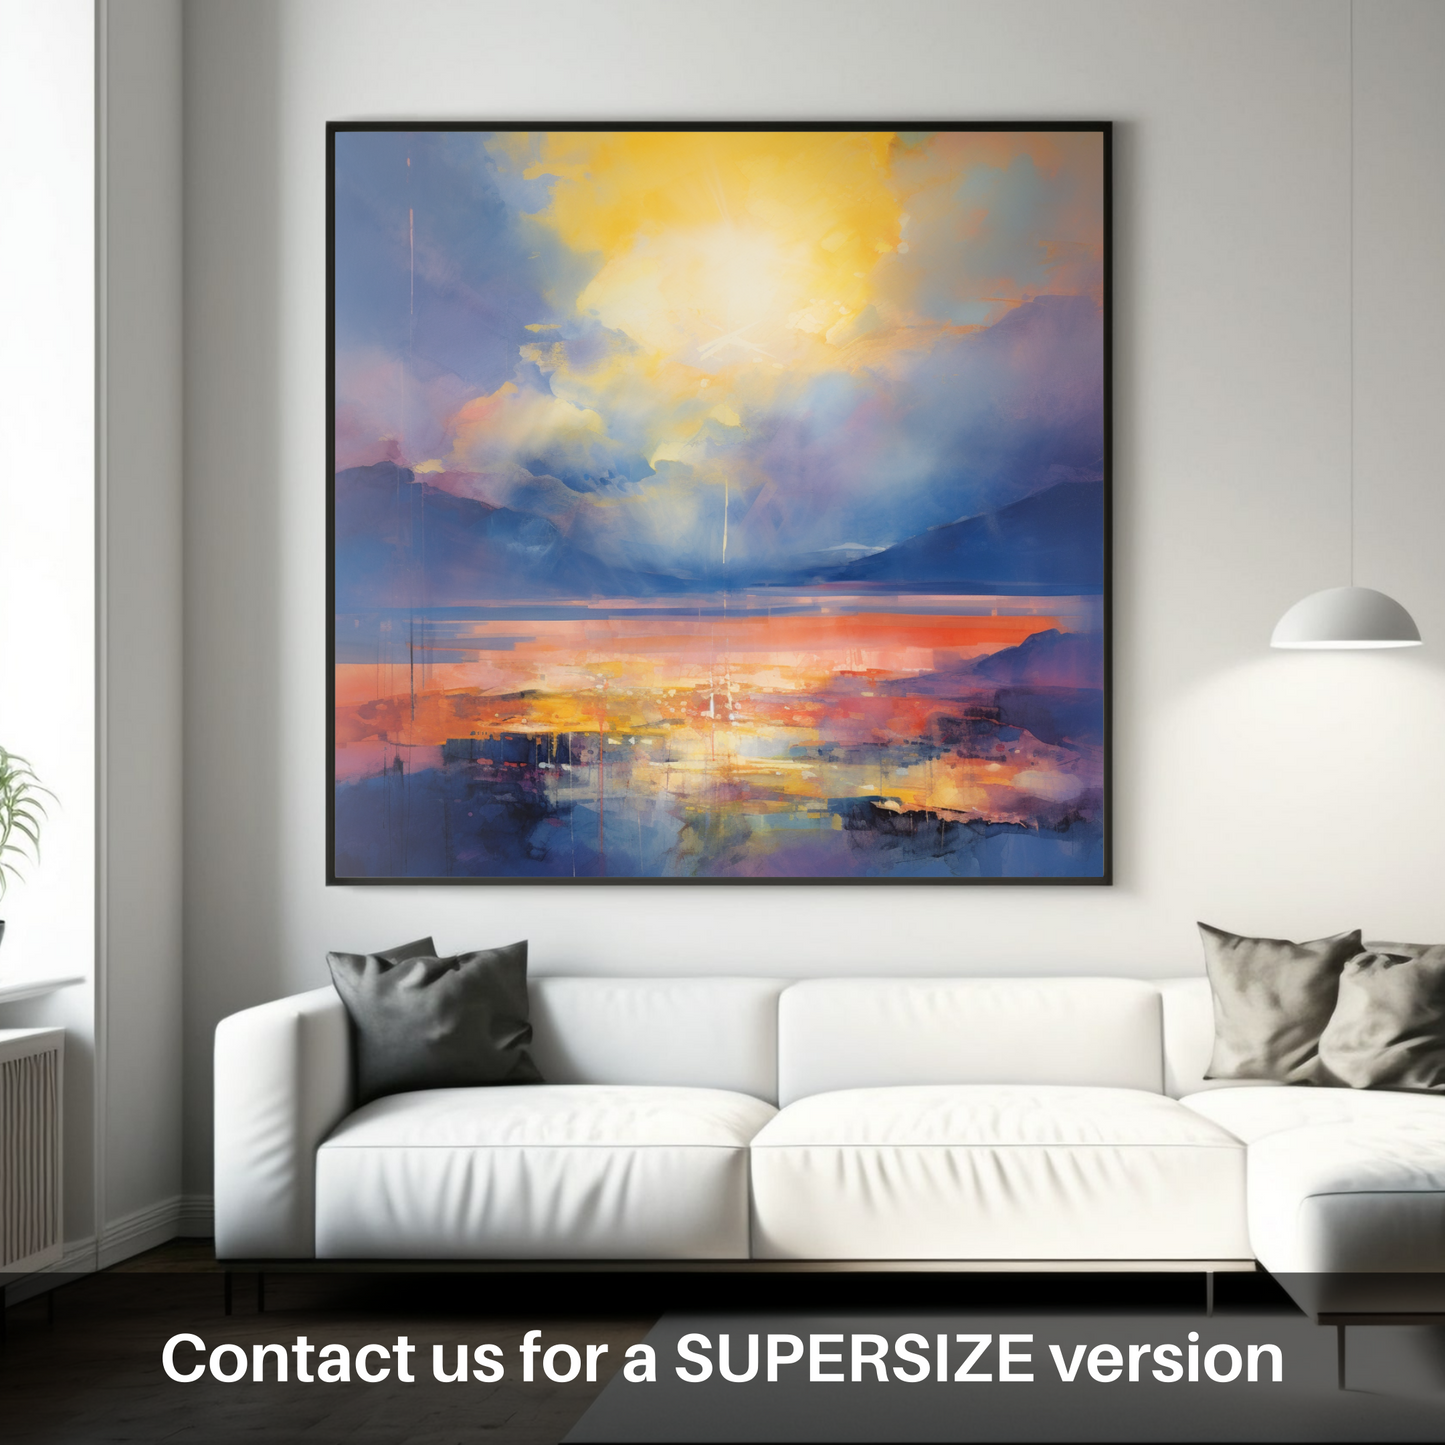 Painting and Art Print of Crepuscular rays above Loch Lomond. Crepuscular Radiance over Loch Lomond.